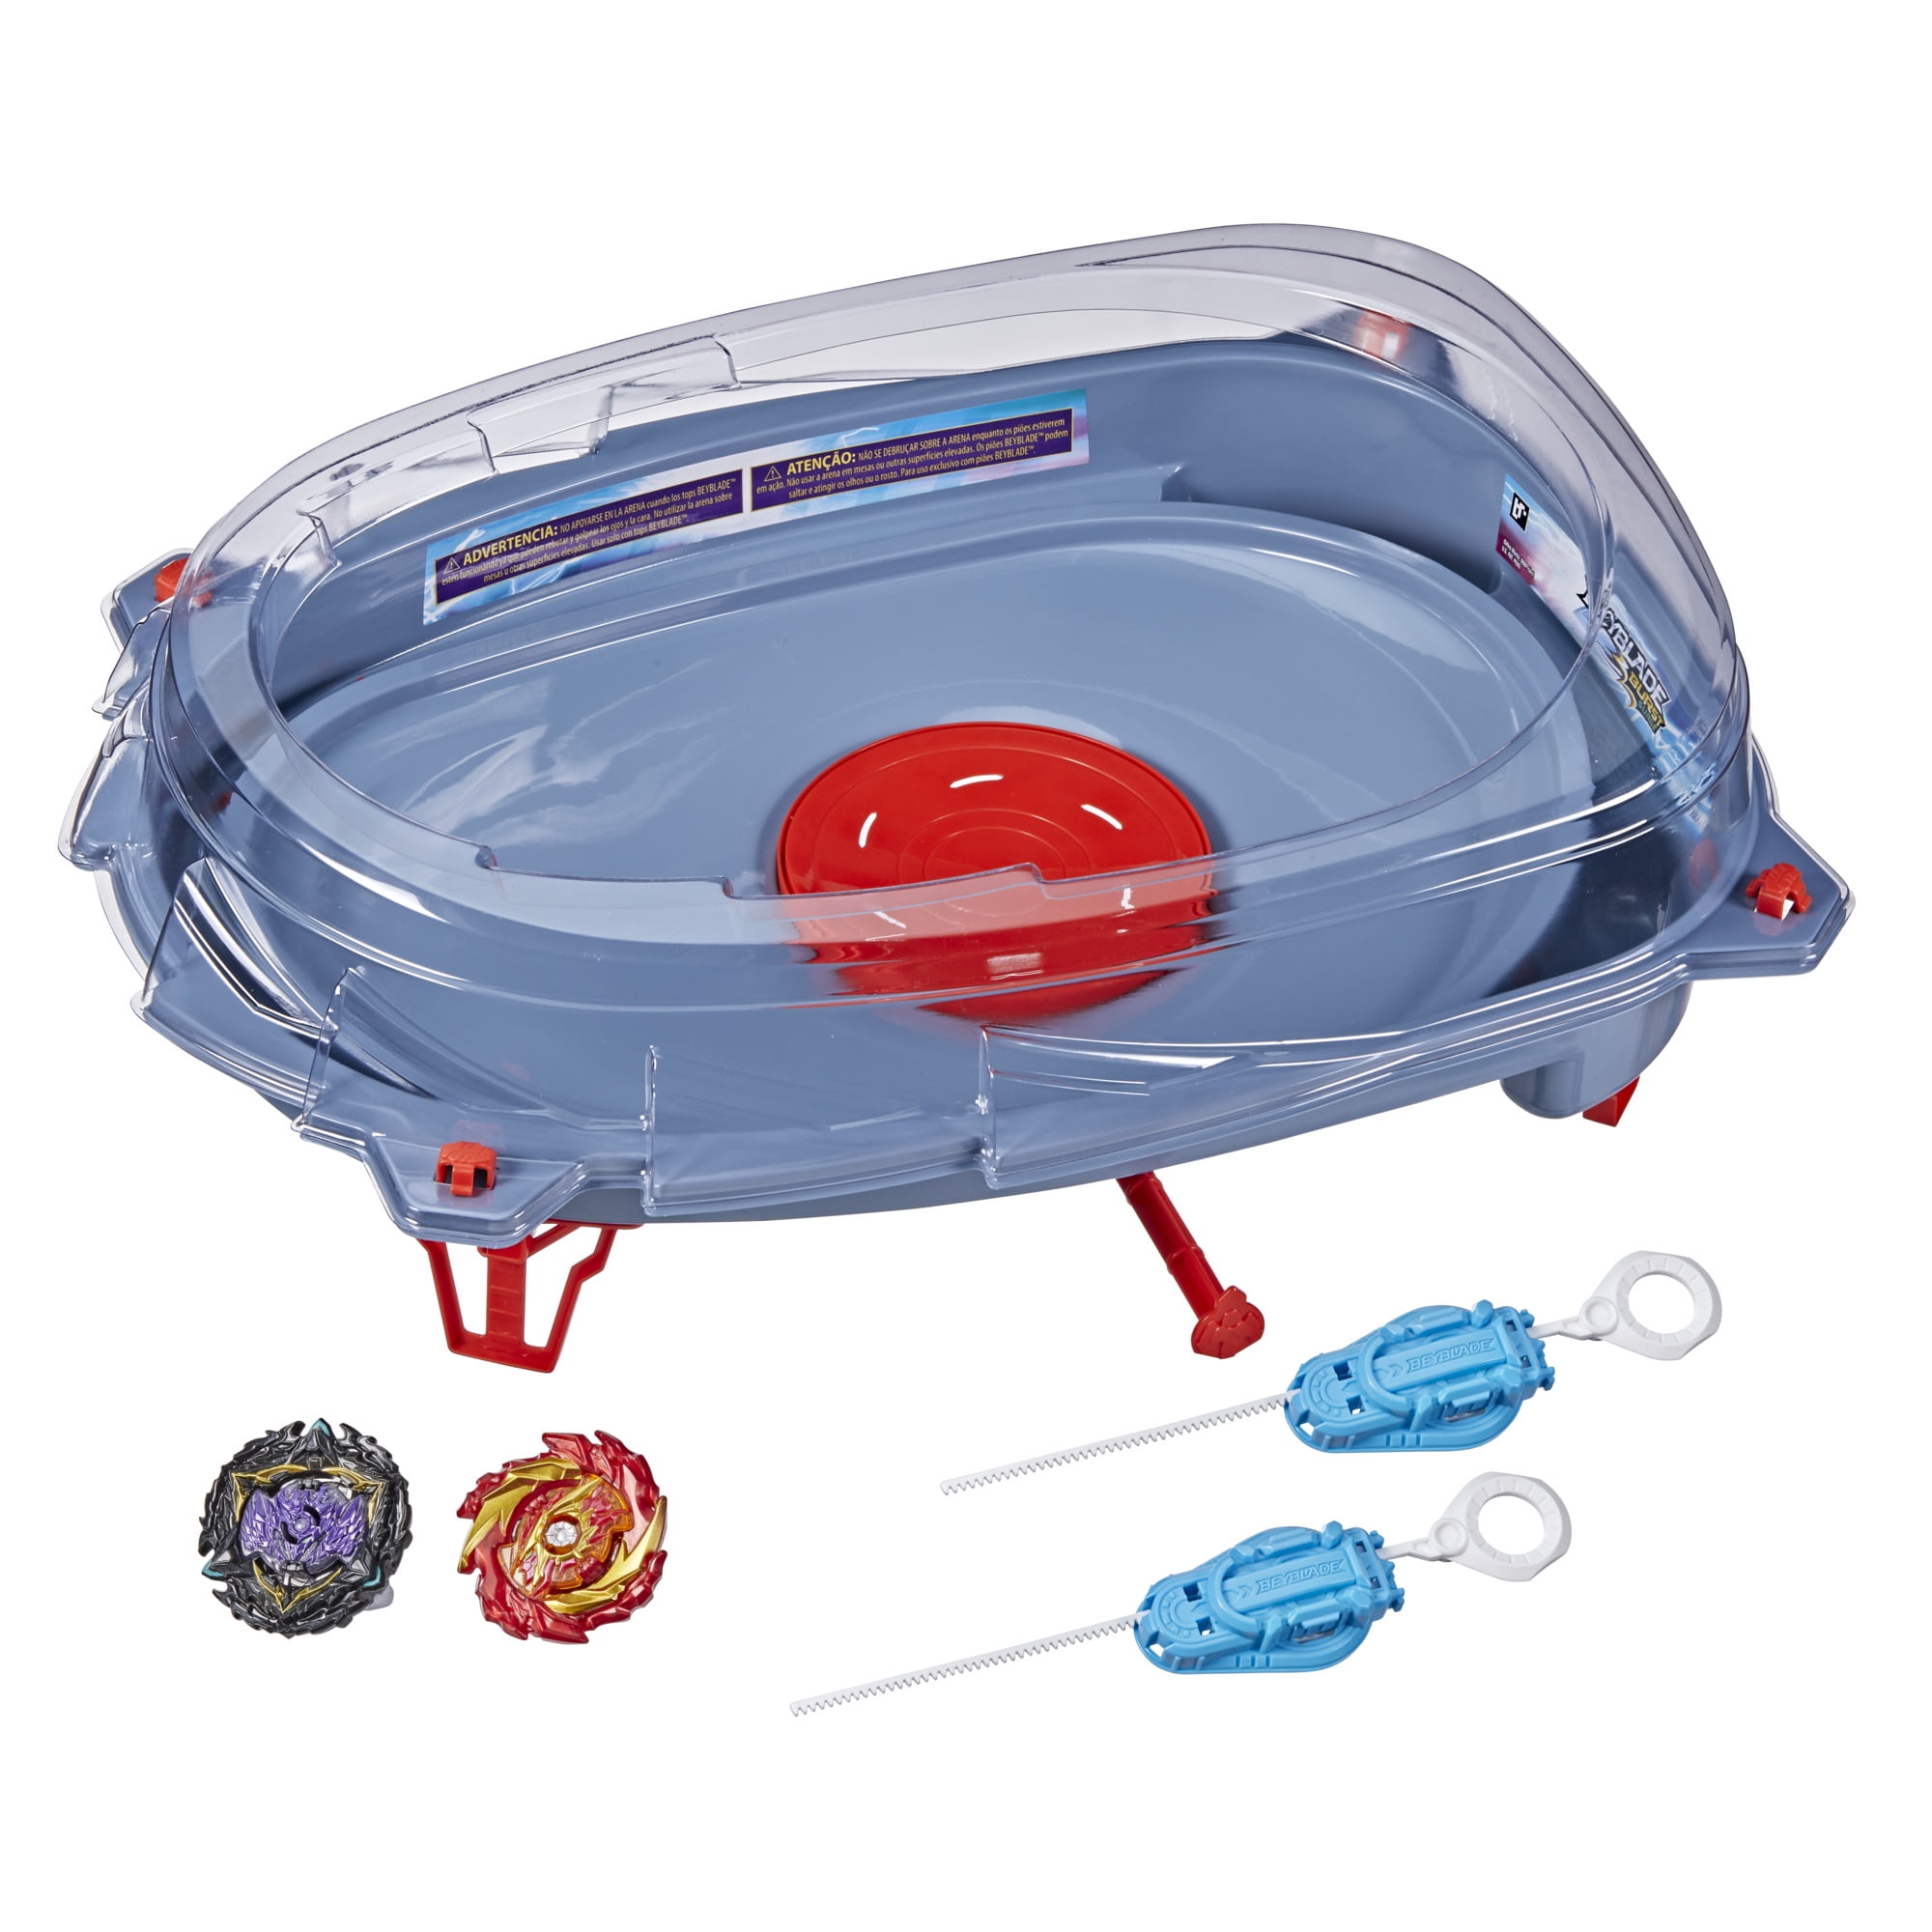 Details about   Stadium Arena Beyblade Battle Top Plate Kids Toys US 